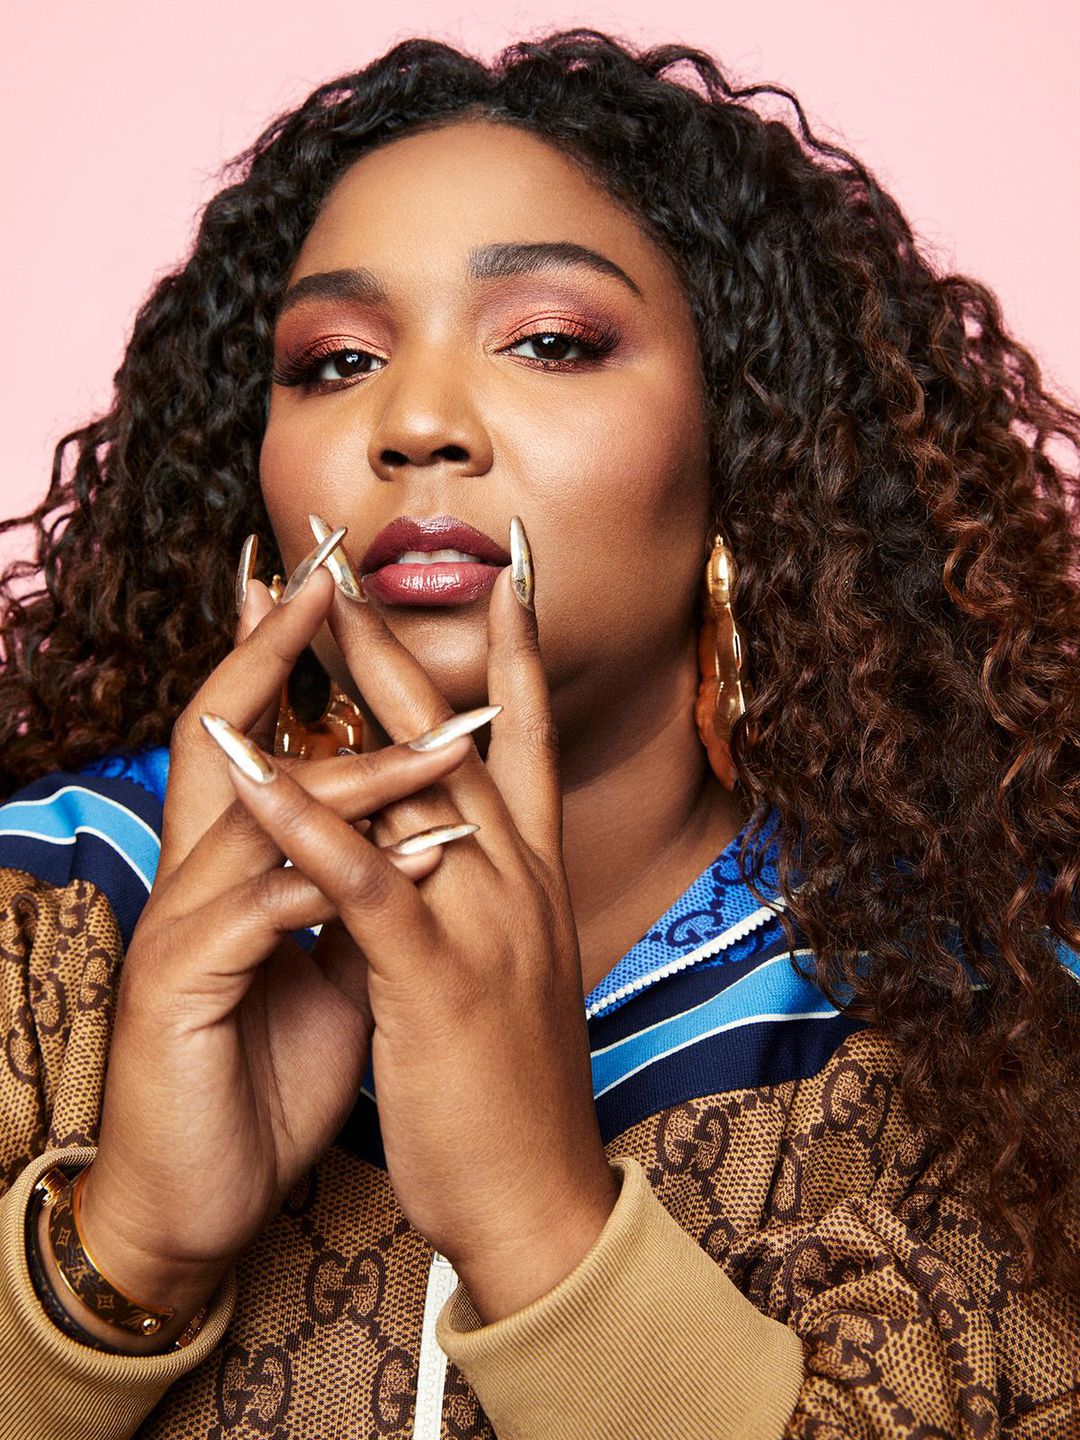 Lizzo who is she